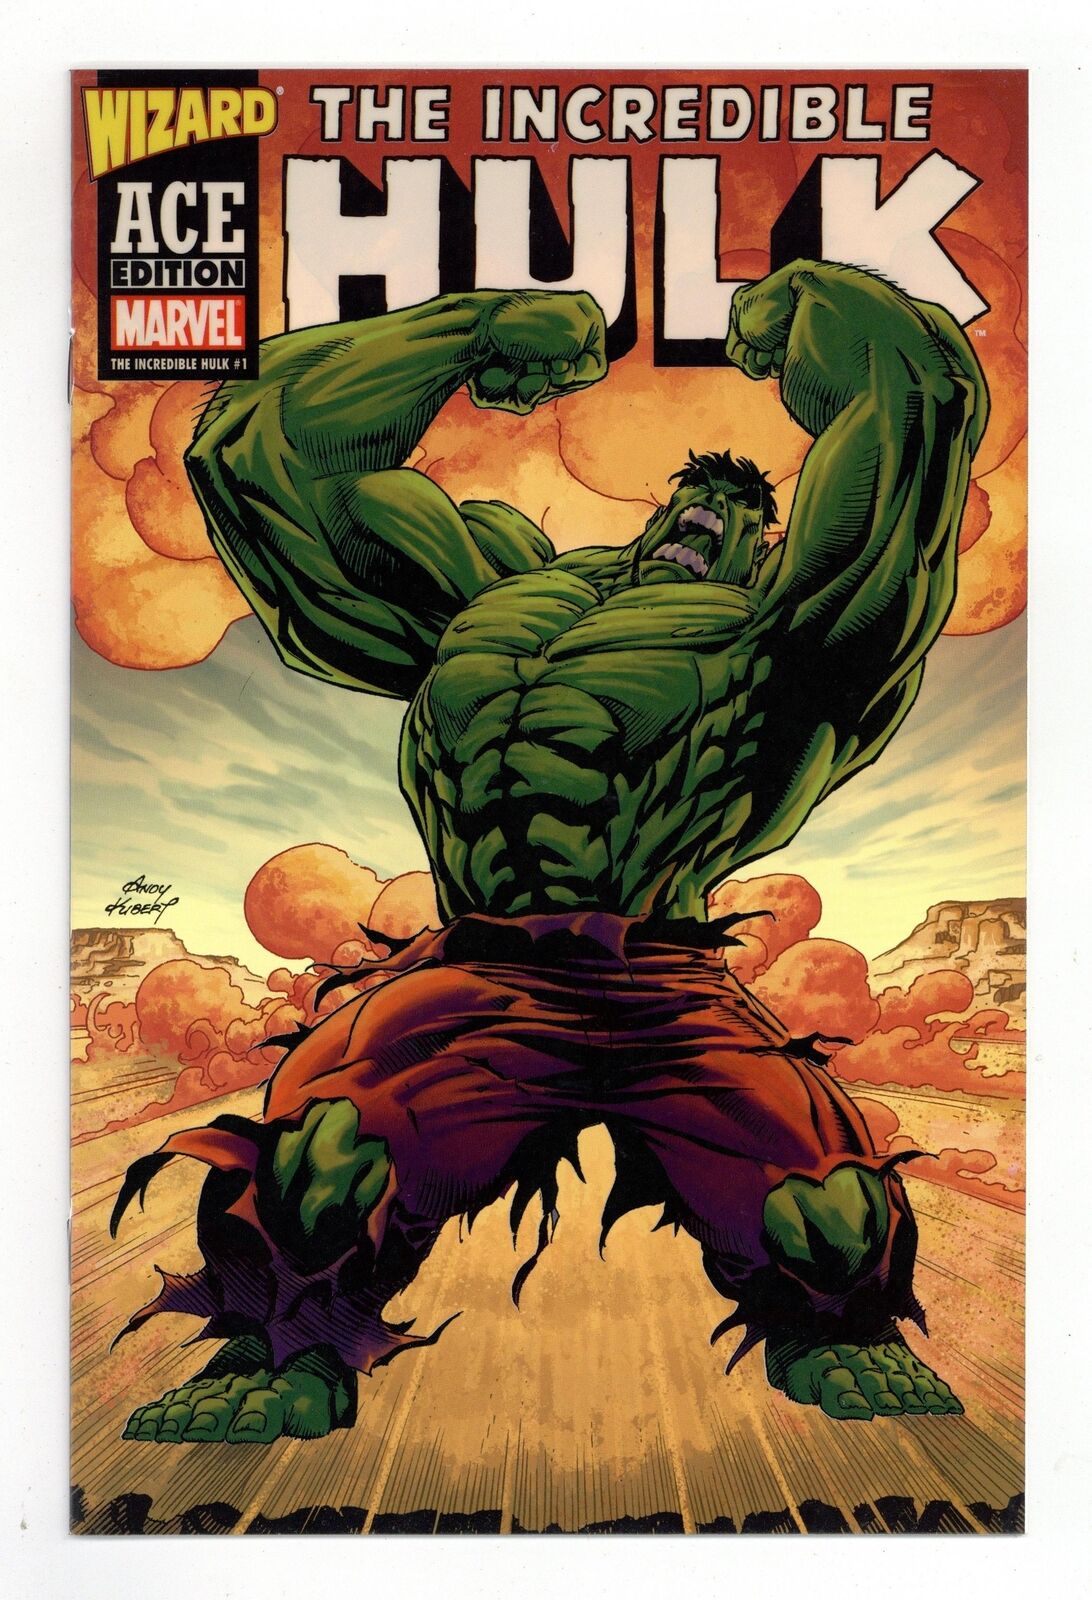 Incredible Hulk Wizard Ace Edition #1 NM- 9.2 2003